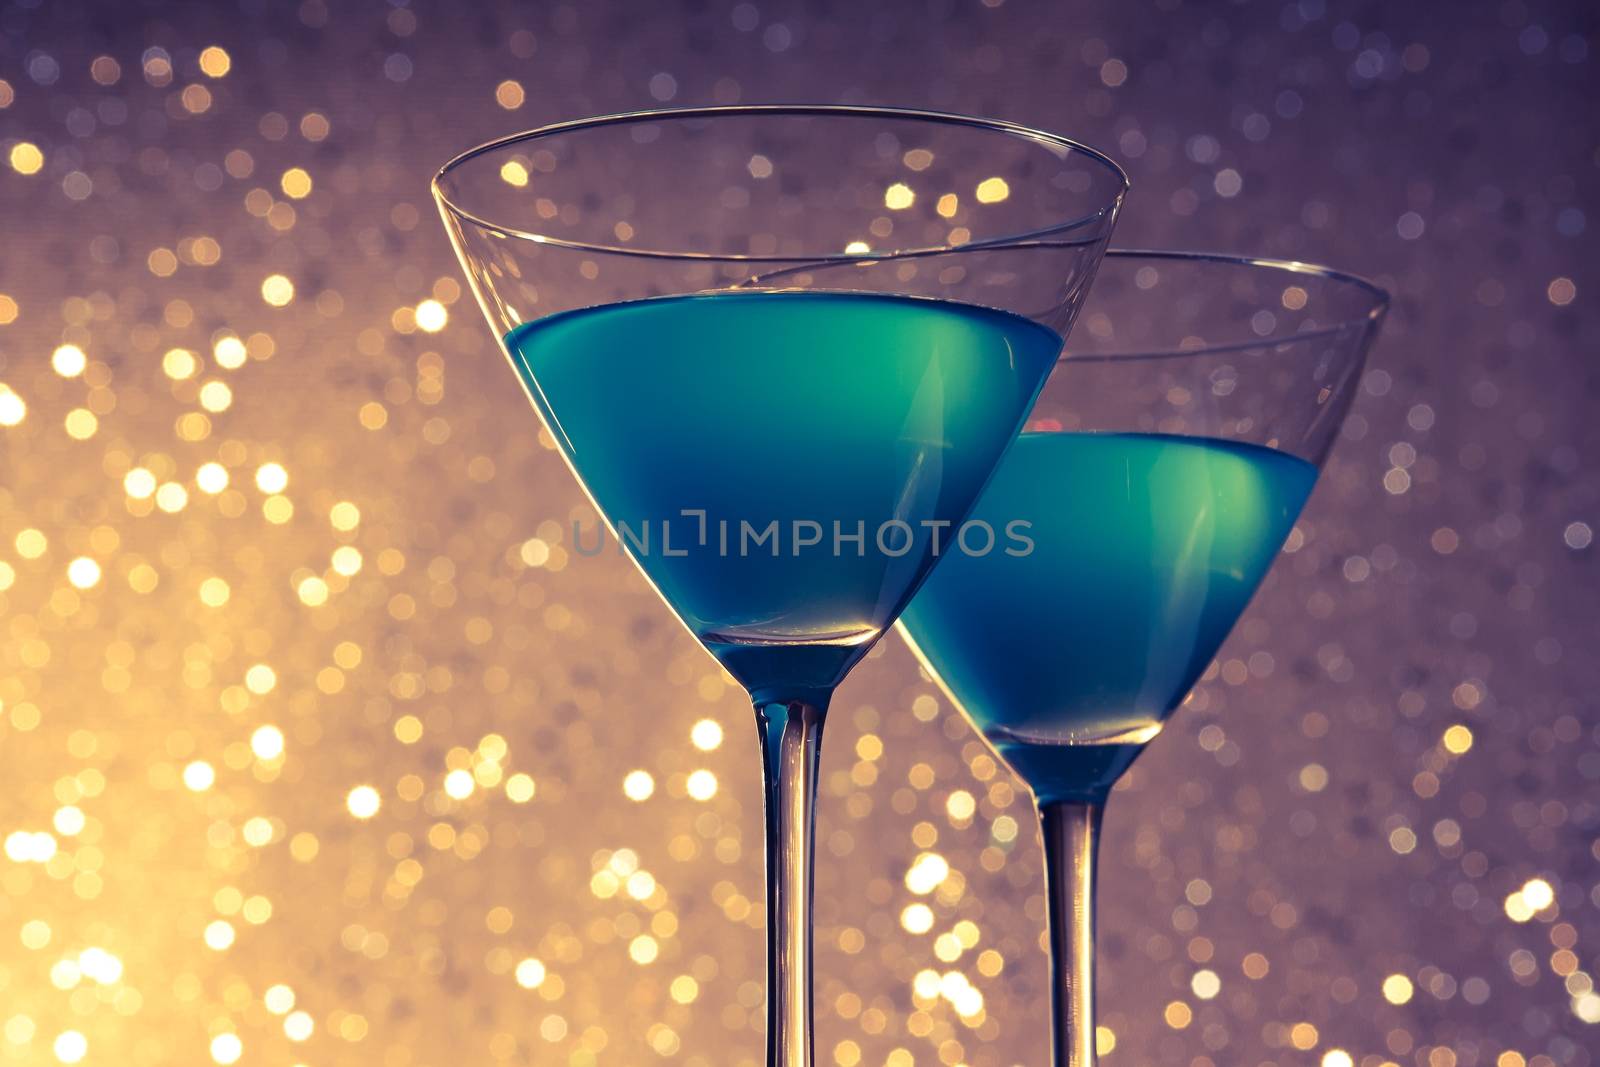 glasses of blue cocktail on golden and violet tint light bokeh background on table